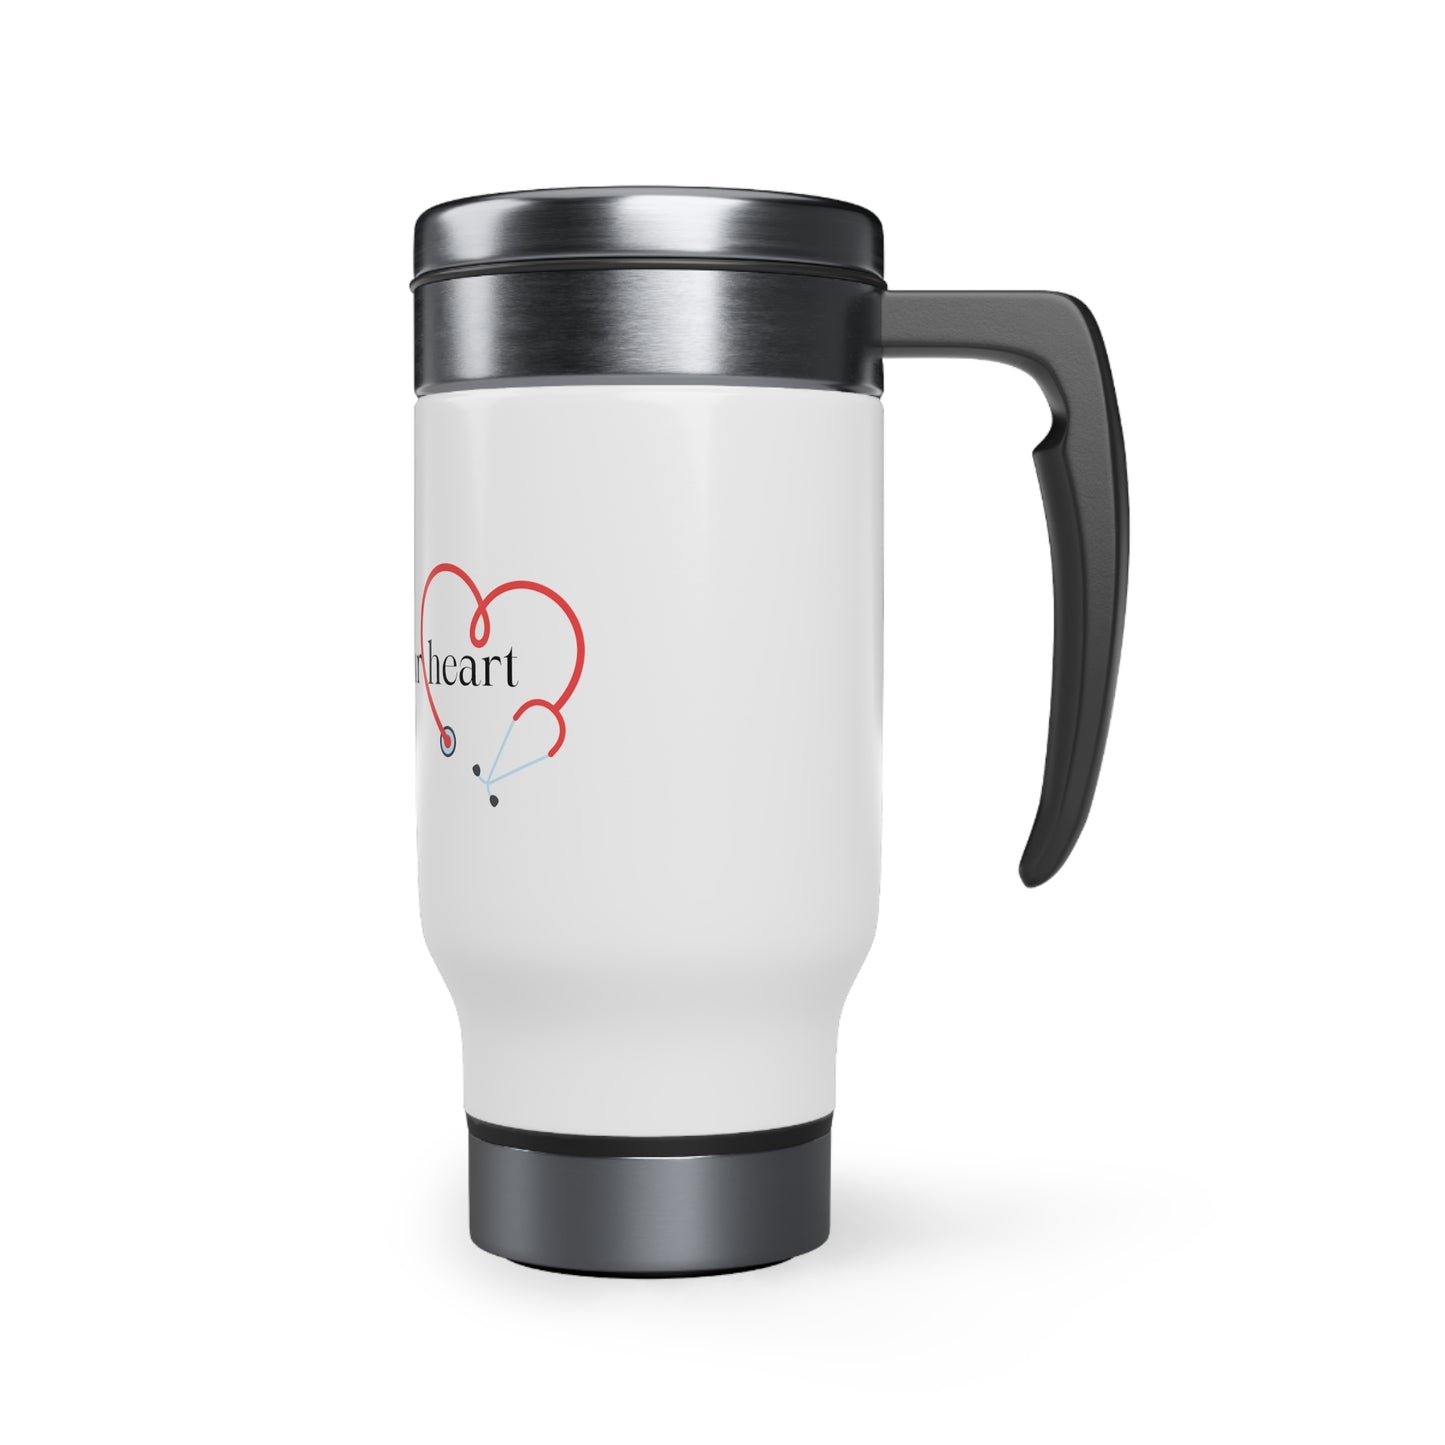 Love your heart Stainless Steel Travel Mug with Handle, 14oz